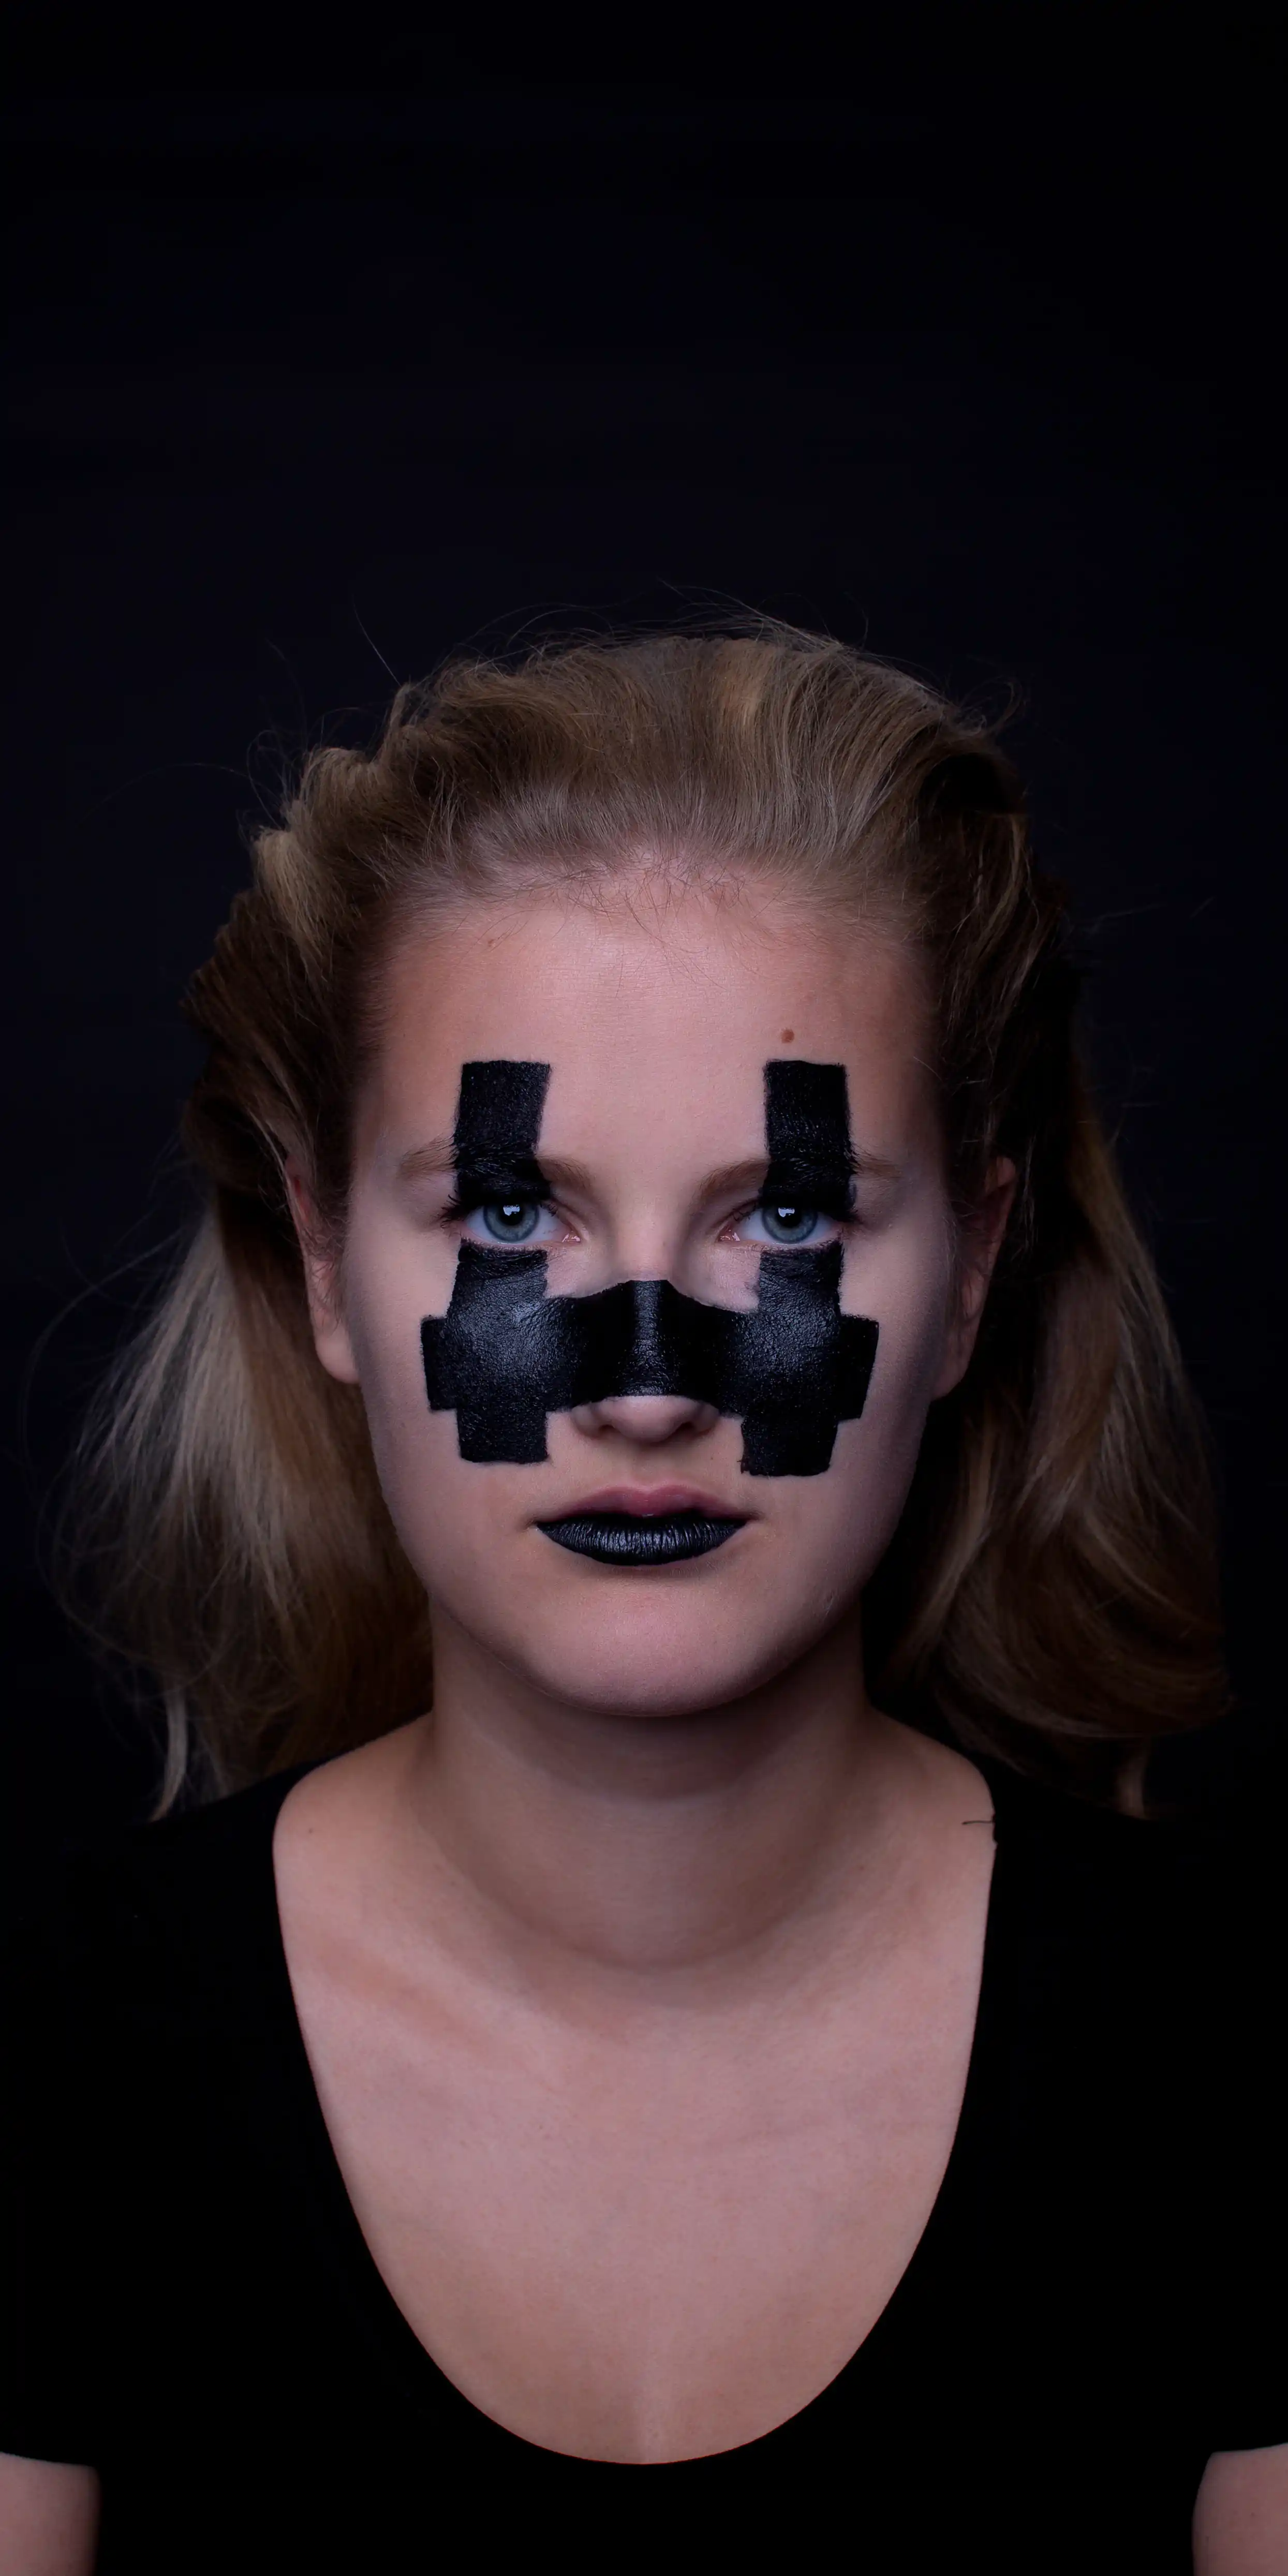 A model with blocky facepaint